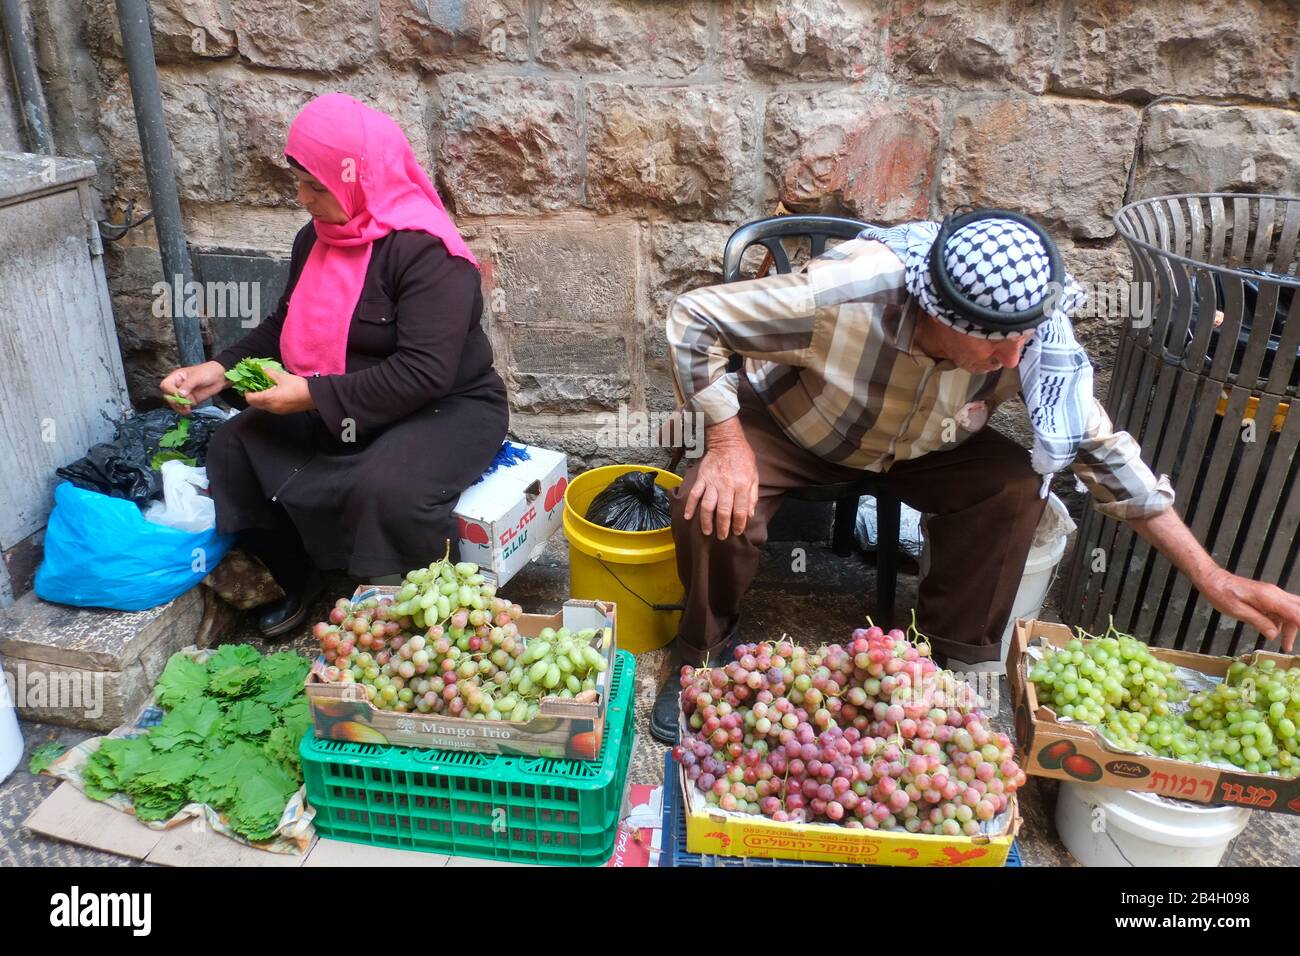 Muslim couple, dressed in traditional muslim clothes, sorting through vegetables. Old City - Jerusalem. Israel Stock Photo